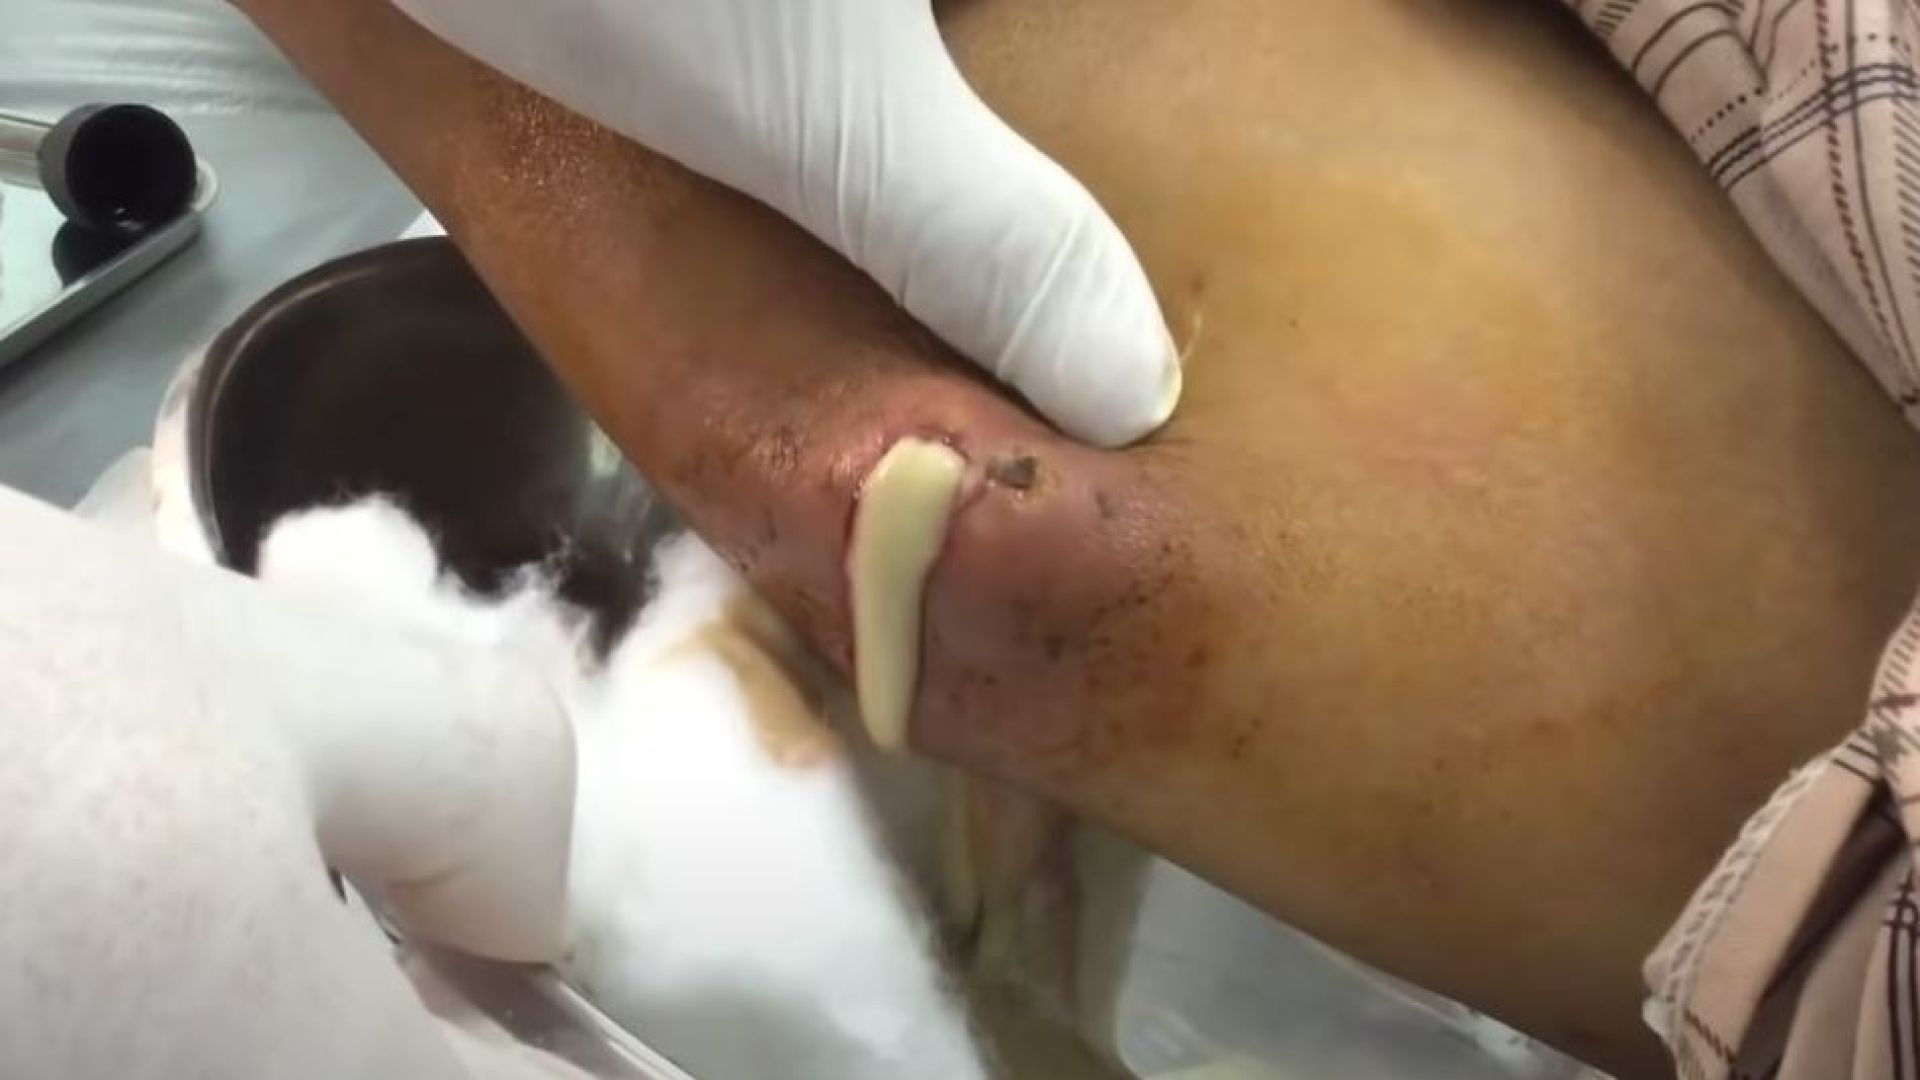 Cyst exploding on knee